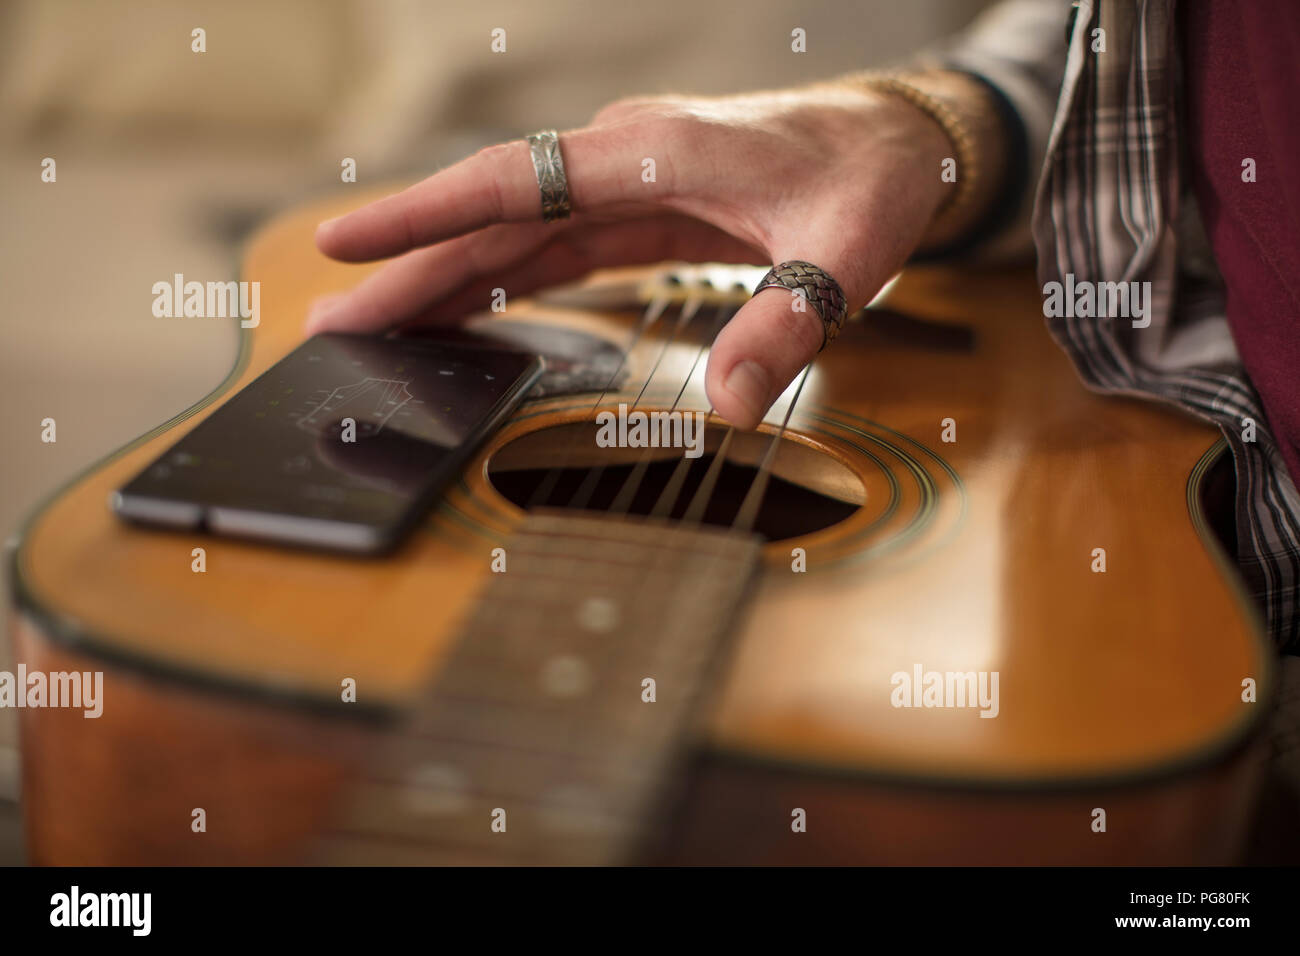 Close-up of man's hand, cell phone and guitar Stock Photo